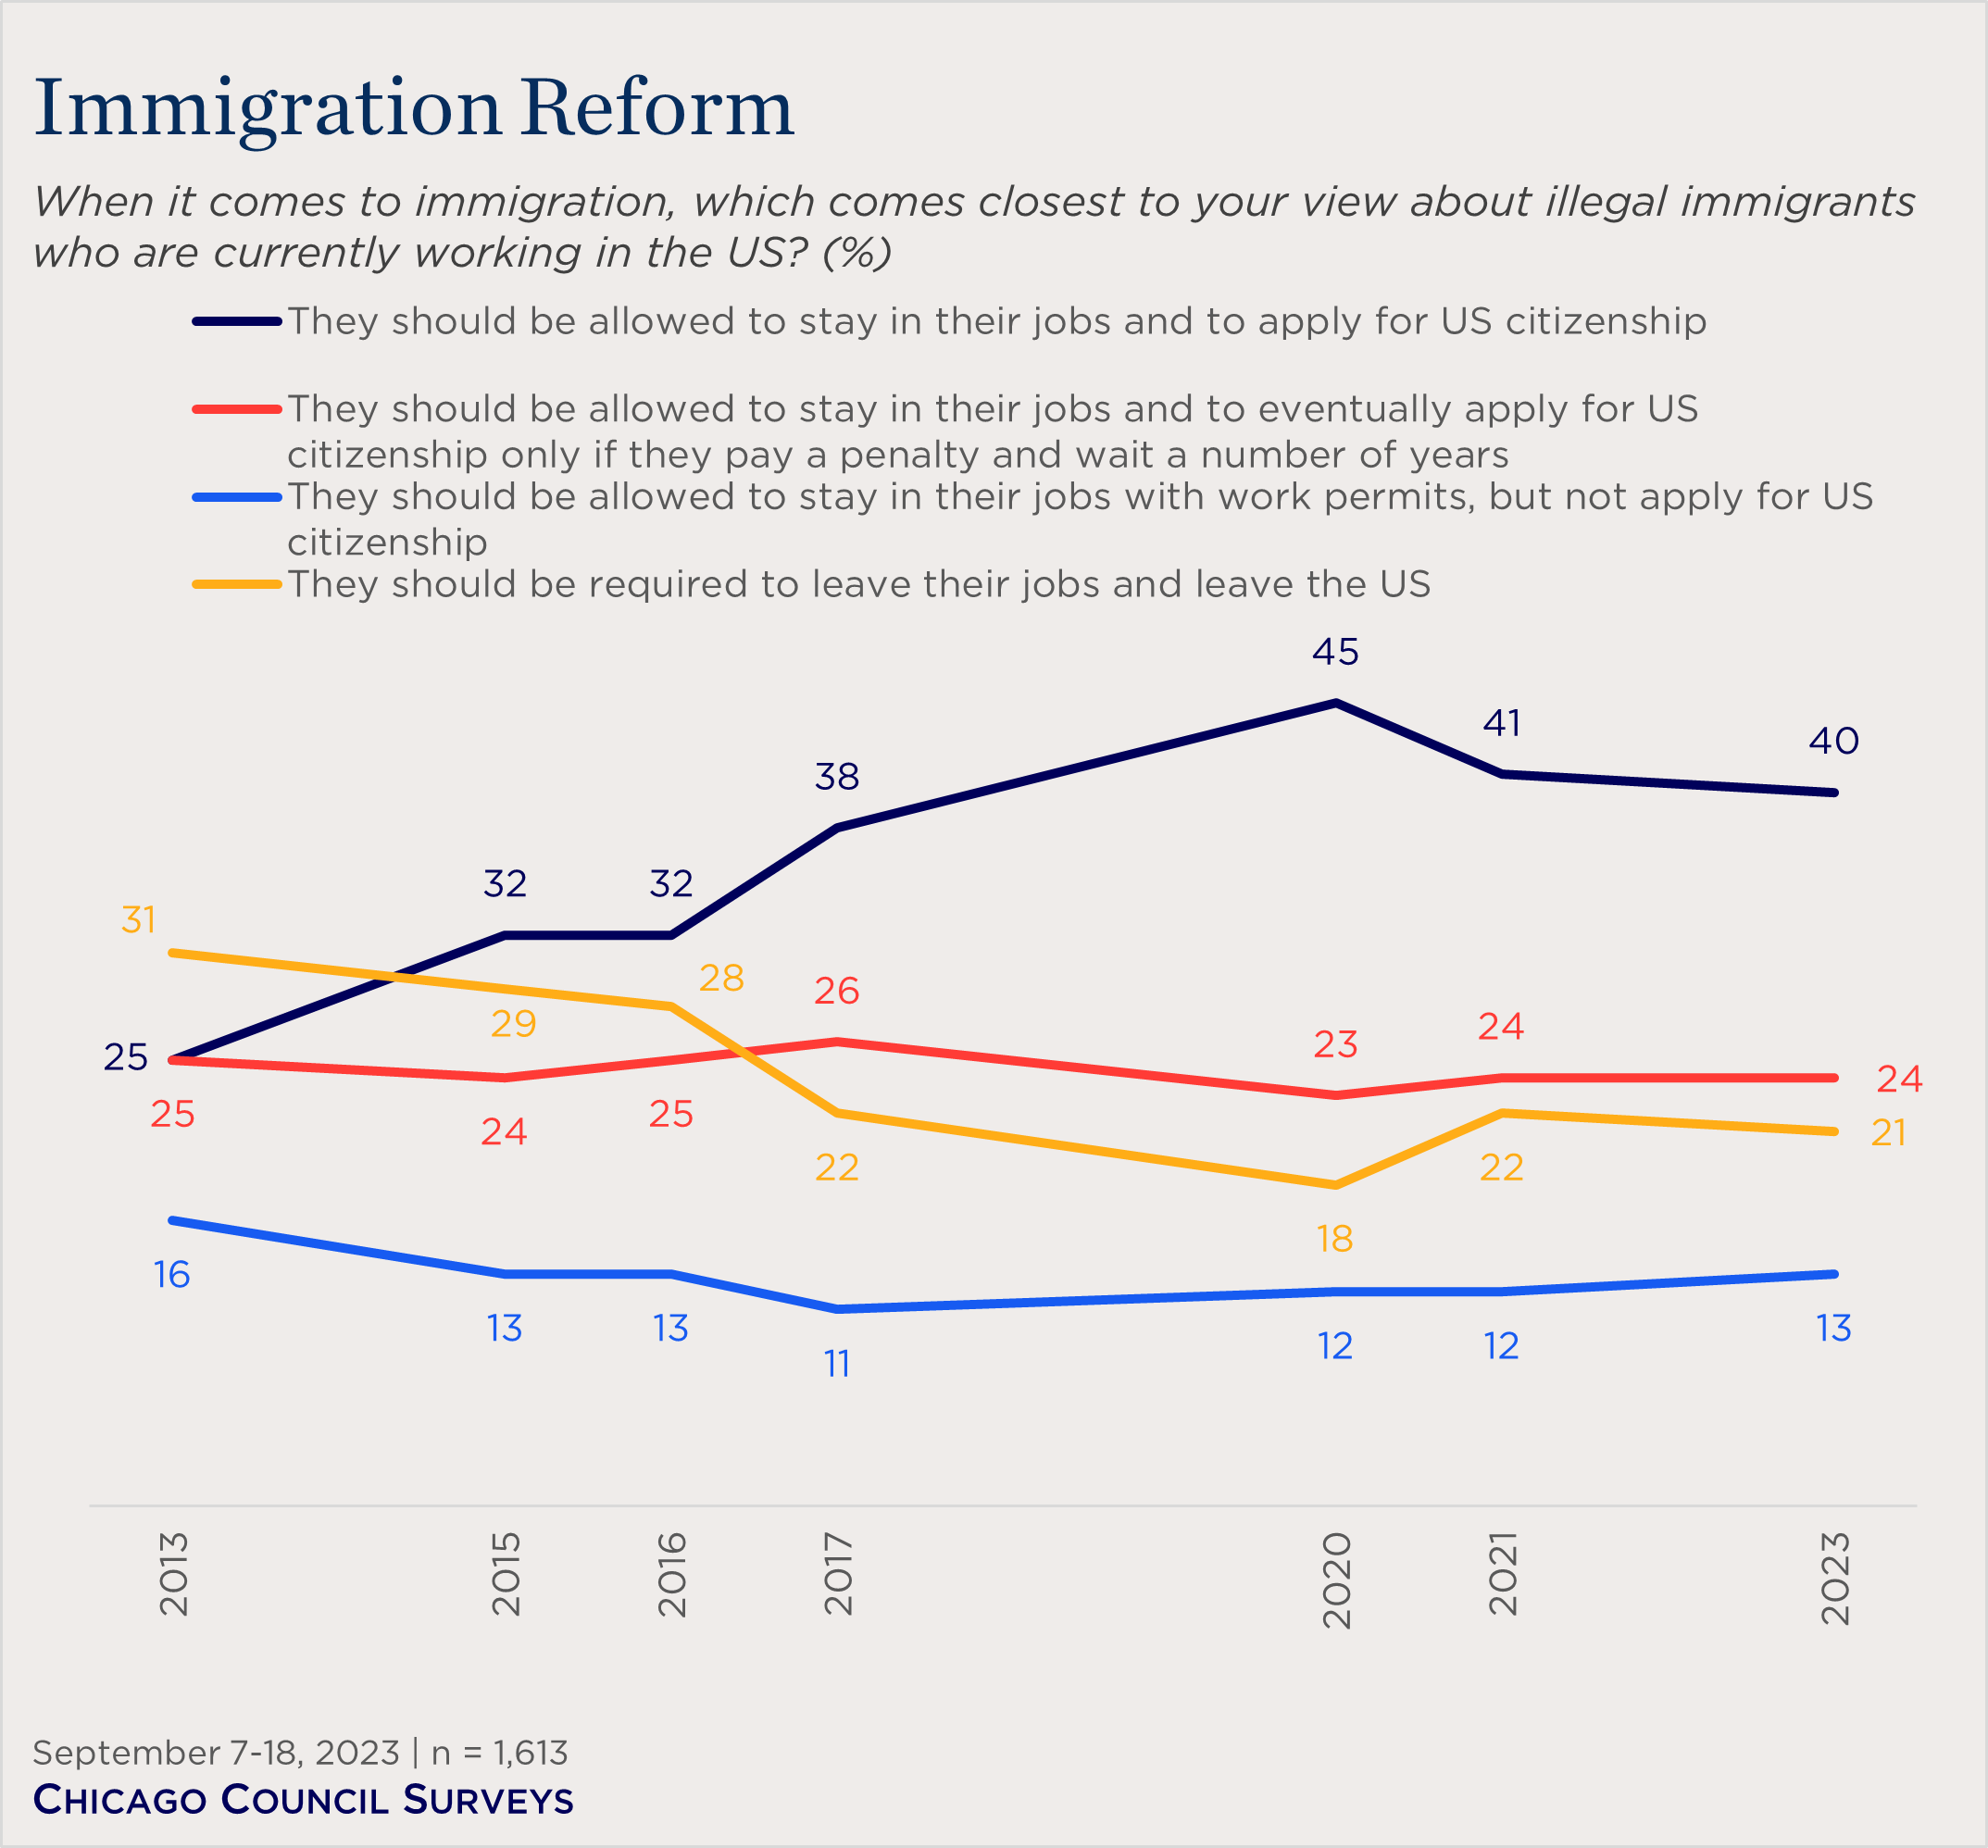 "line chart showing views on immigration reform"